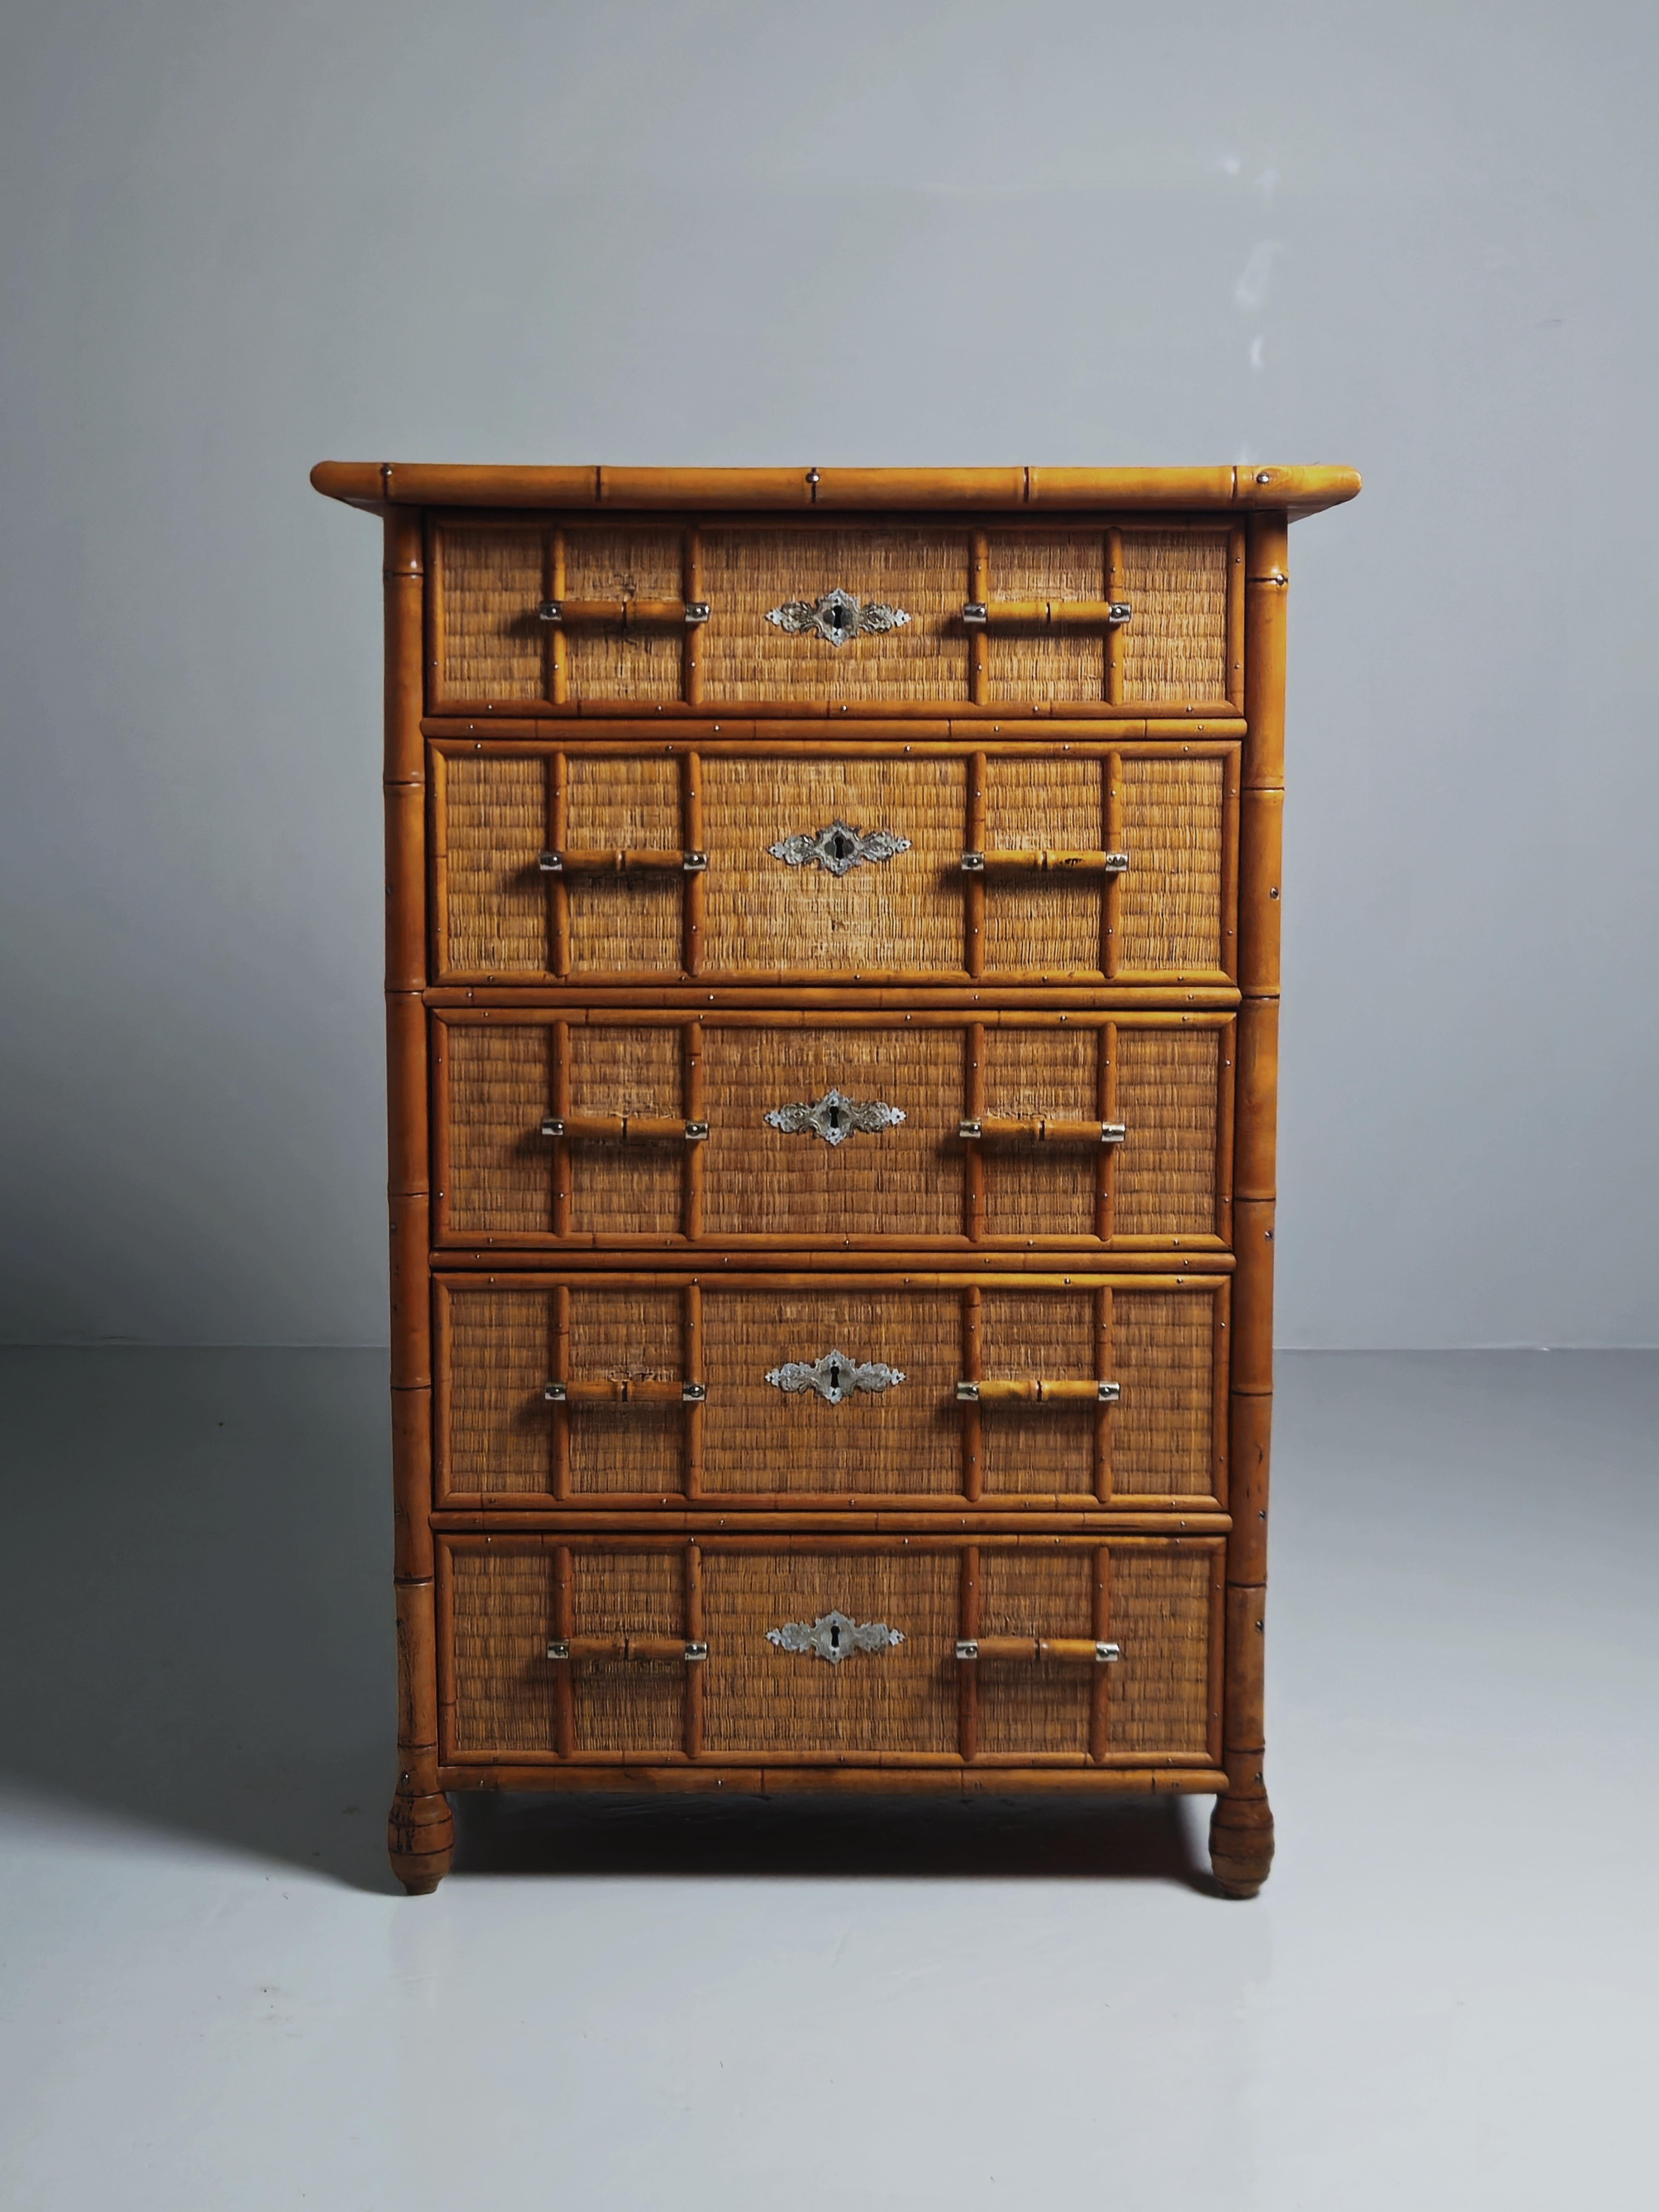 Great chest of drawers, model No 555, produced by Bodafors, Sweden, during the 1890s.

Made with bamboo imitation in cut beech, five drawers with fronts covered with Japanese straw mats and nickel-plated fittings.